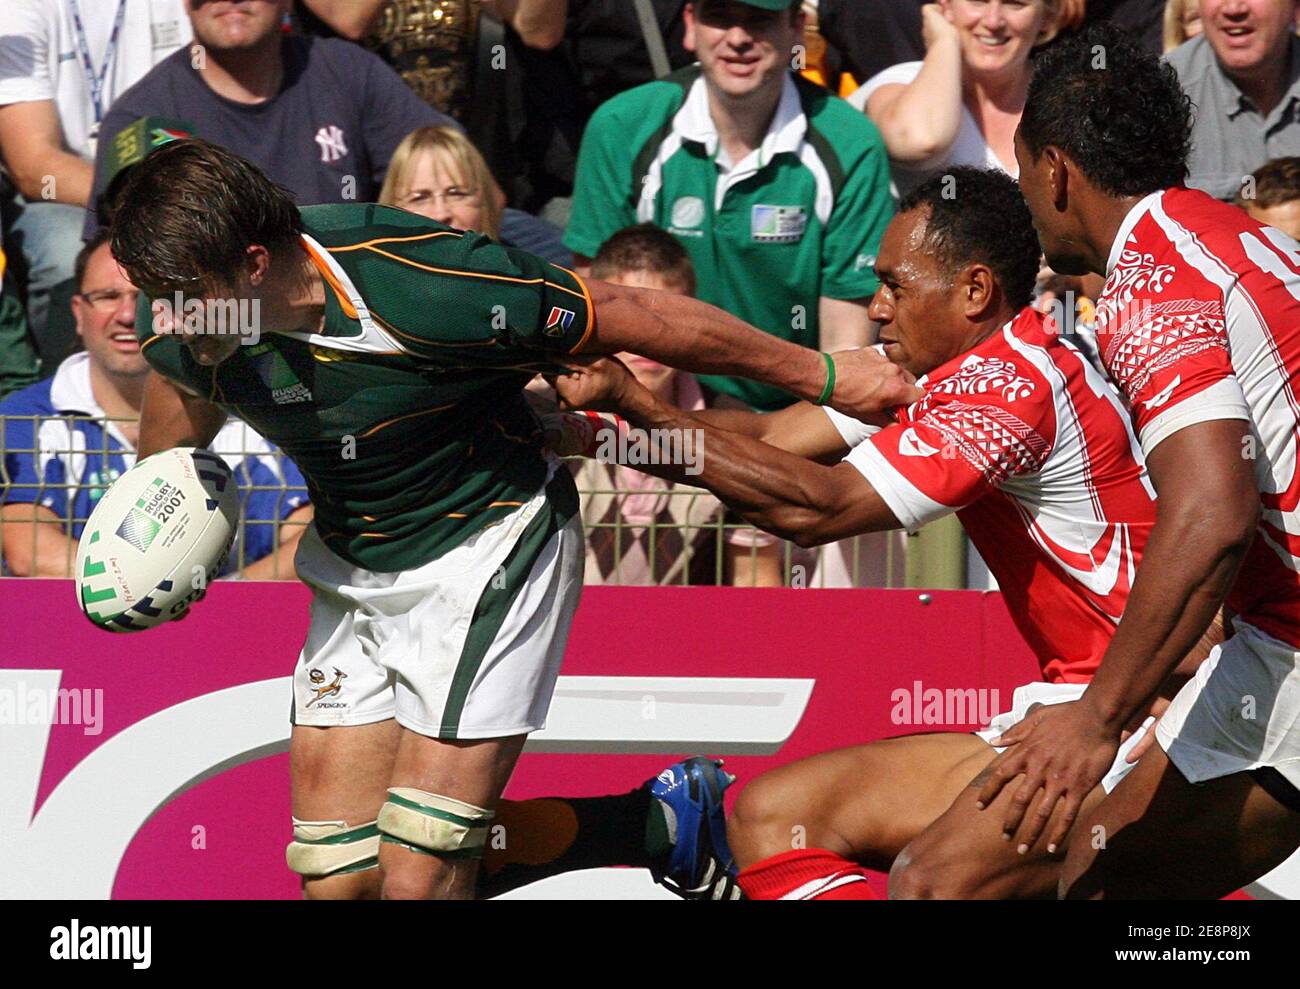 South Africa's captain Bobby Skinstad scores a try during the IRB Rugby World Cup 2007, Pool A, South Africa vs Tonga at the Bollaert stadium in Lens, France on September 22, 2007. Photo by Mehdi Taamallah/Cameleon/ABACAPRESS.COM Stock Photo